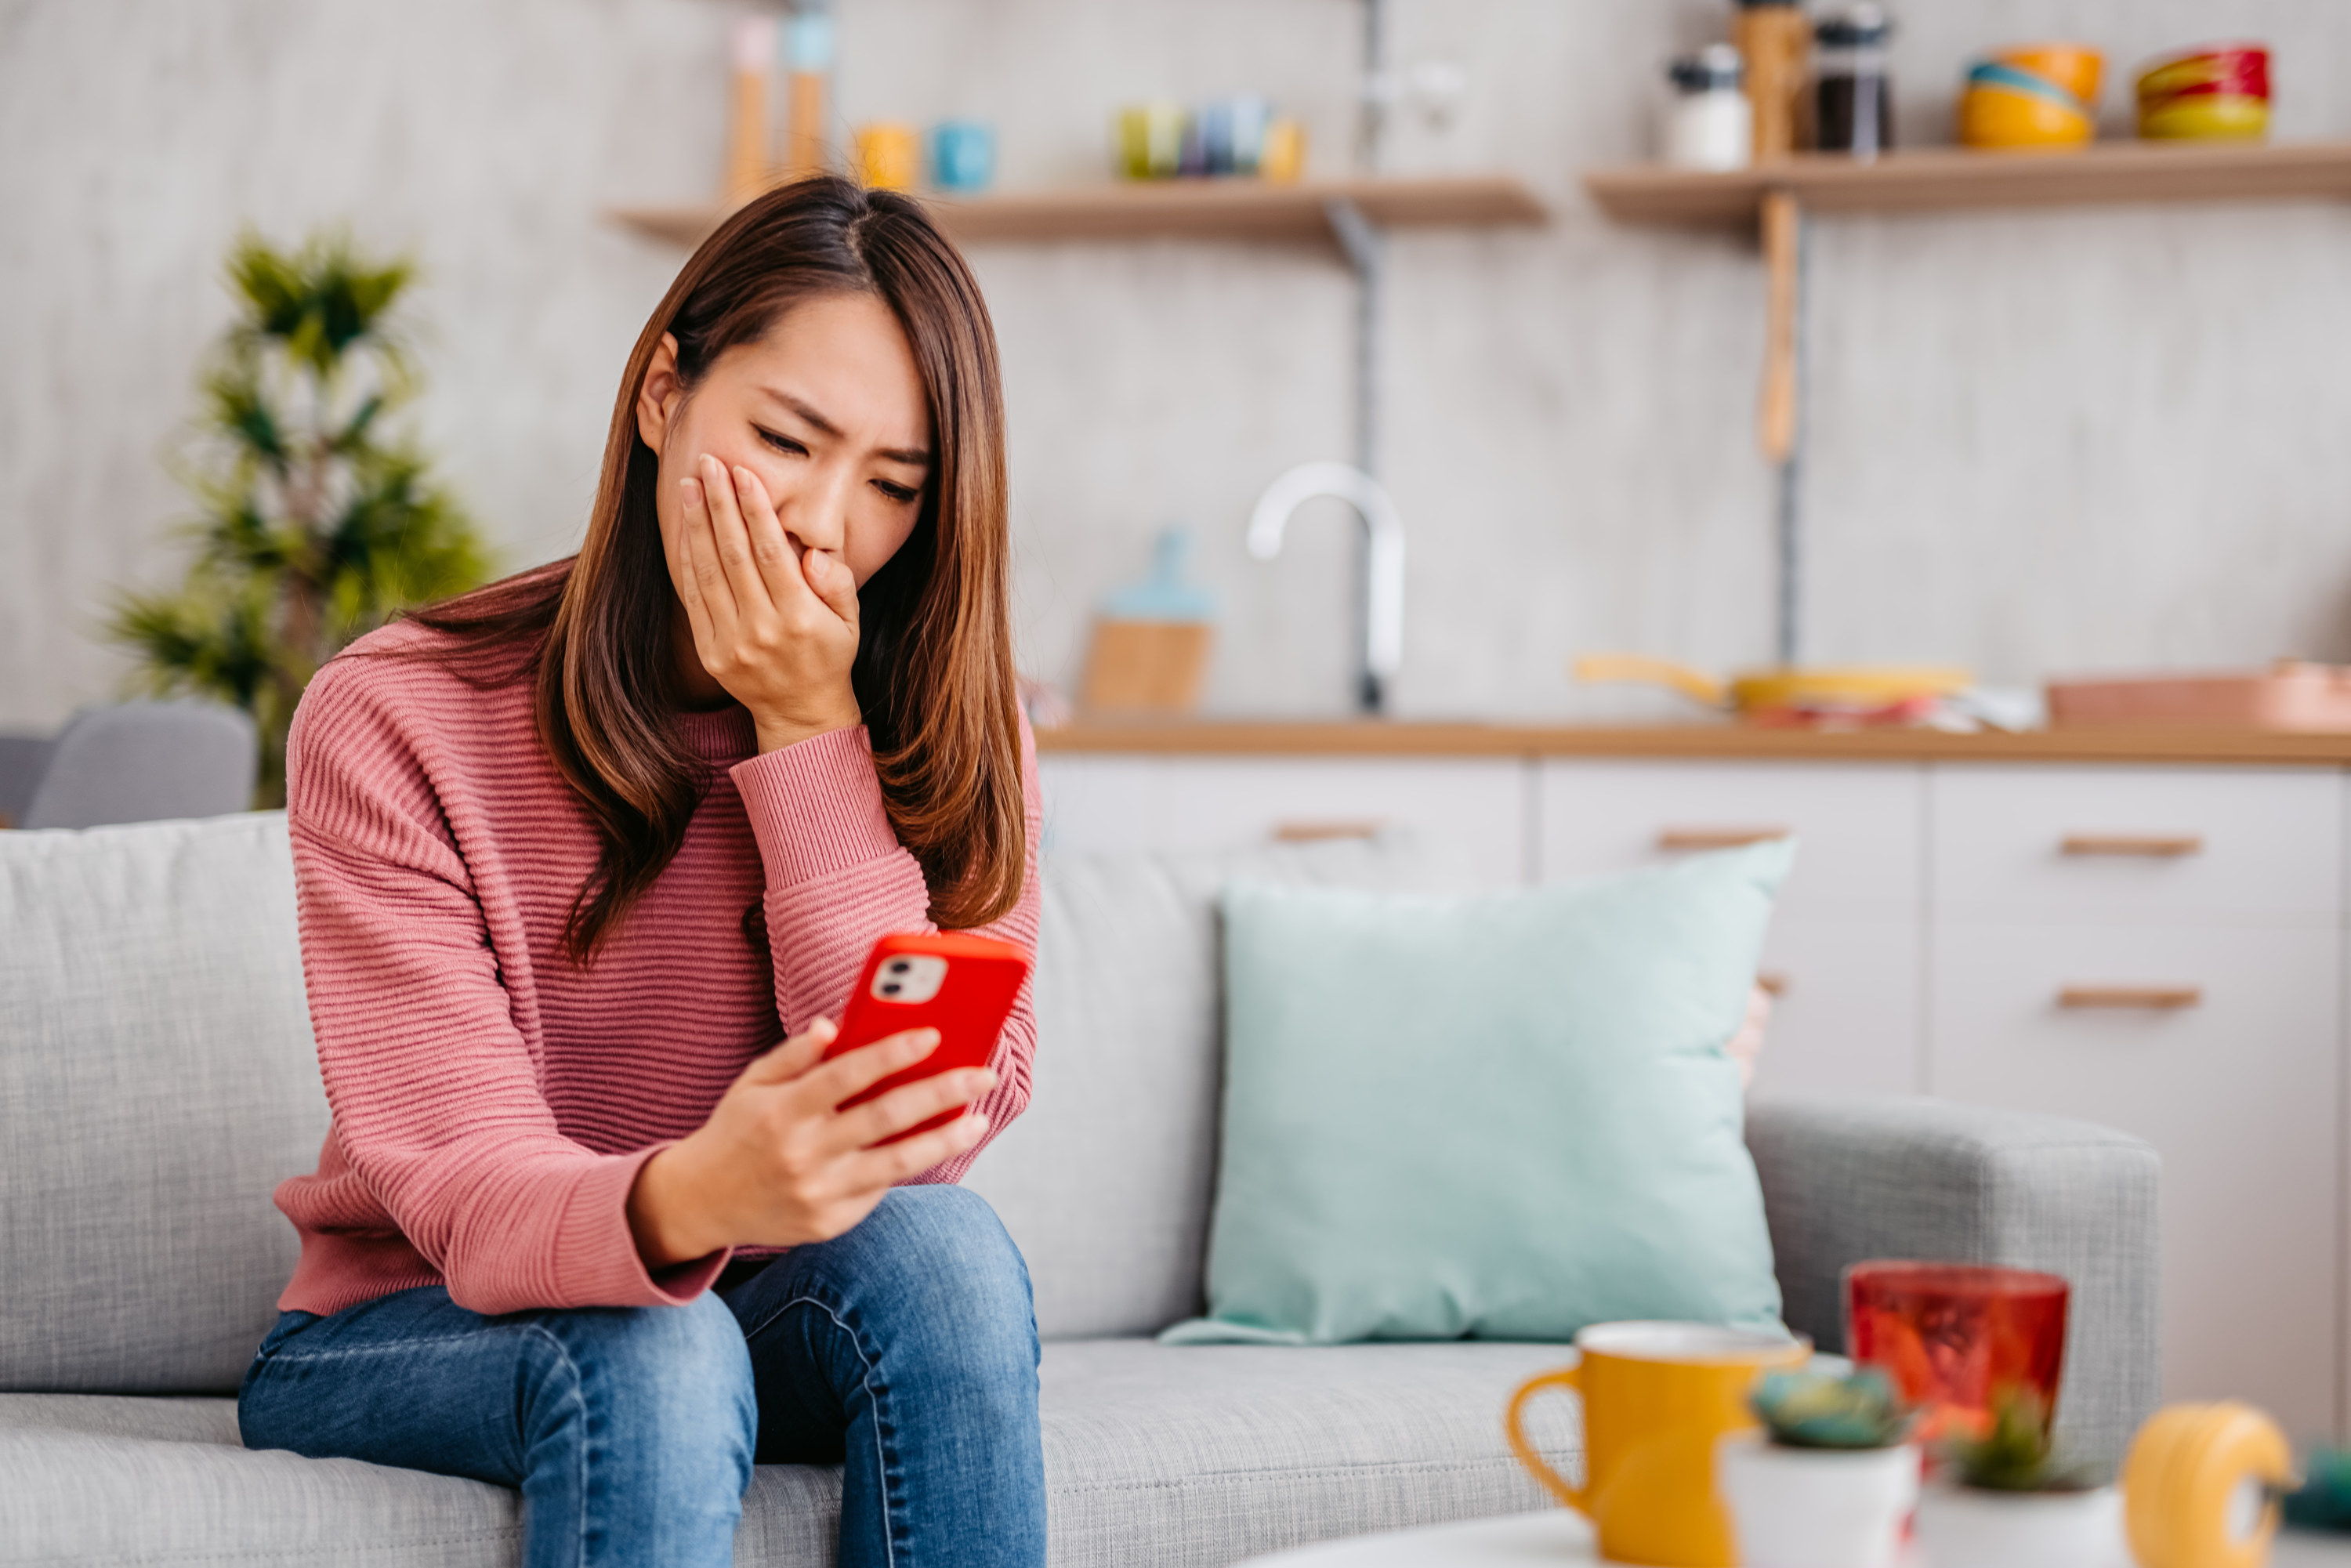 Woman sitting on a couch and looking at her phone while covering her mouth with her hand